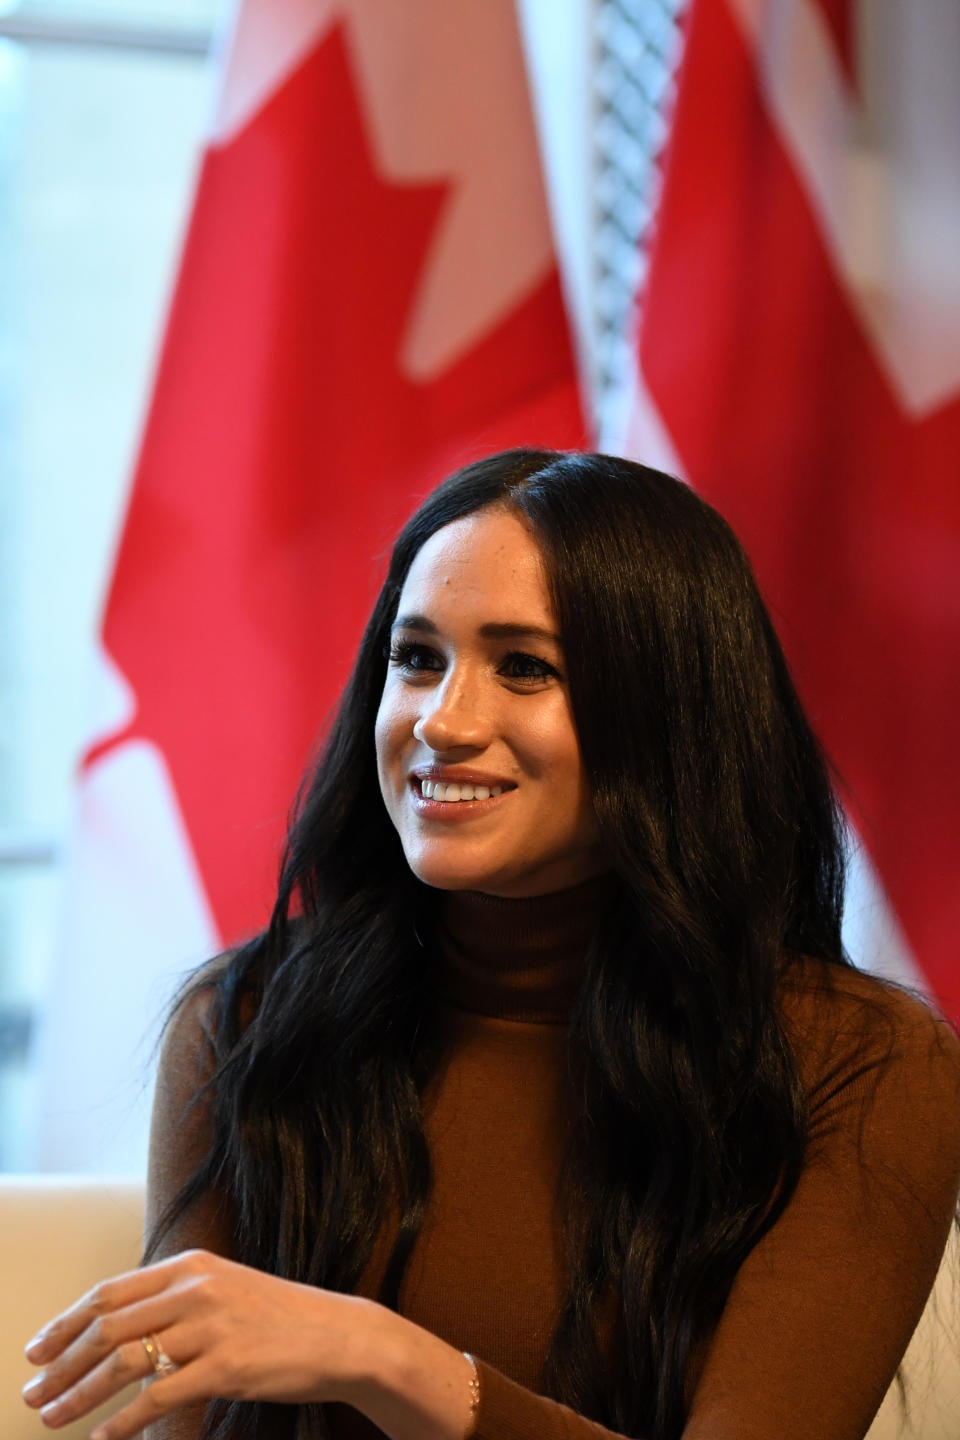 LONDON, UNITED KINGDOM - JANUARY 07: Meghan, Duchess of Sussex gestures during her visit with Prince Harry to Canada House in thanks for the warm Canadian hospitality and support they received during their recent stay in Canada, on January 7, 2020 in London, England. (Photo by DANIEL LEAL-OLIVAS  - WPA Pool/Getty Images)